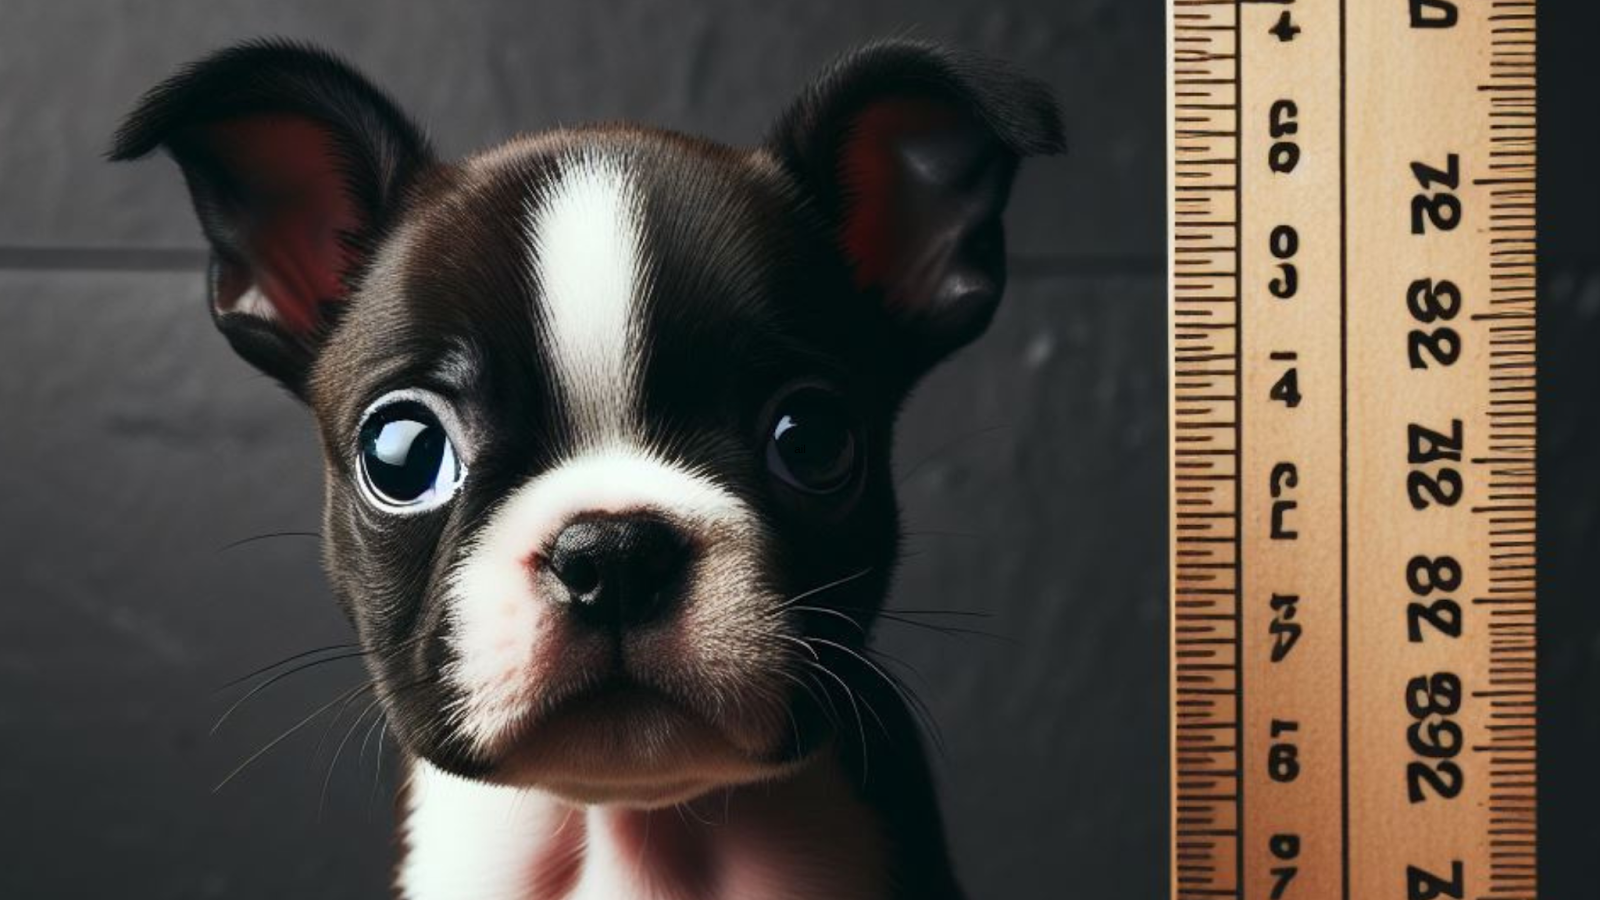 A Boston Terrier puppy next to a ruler measuring their height